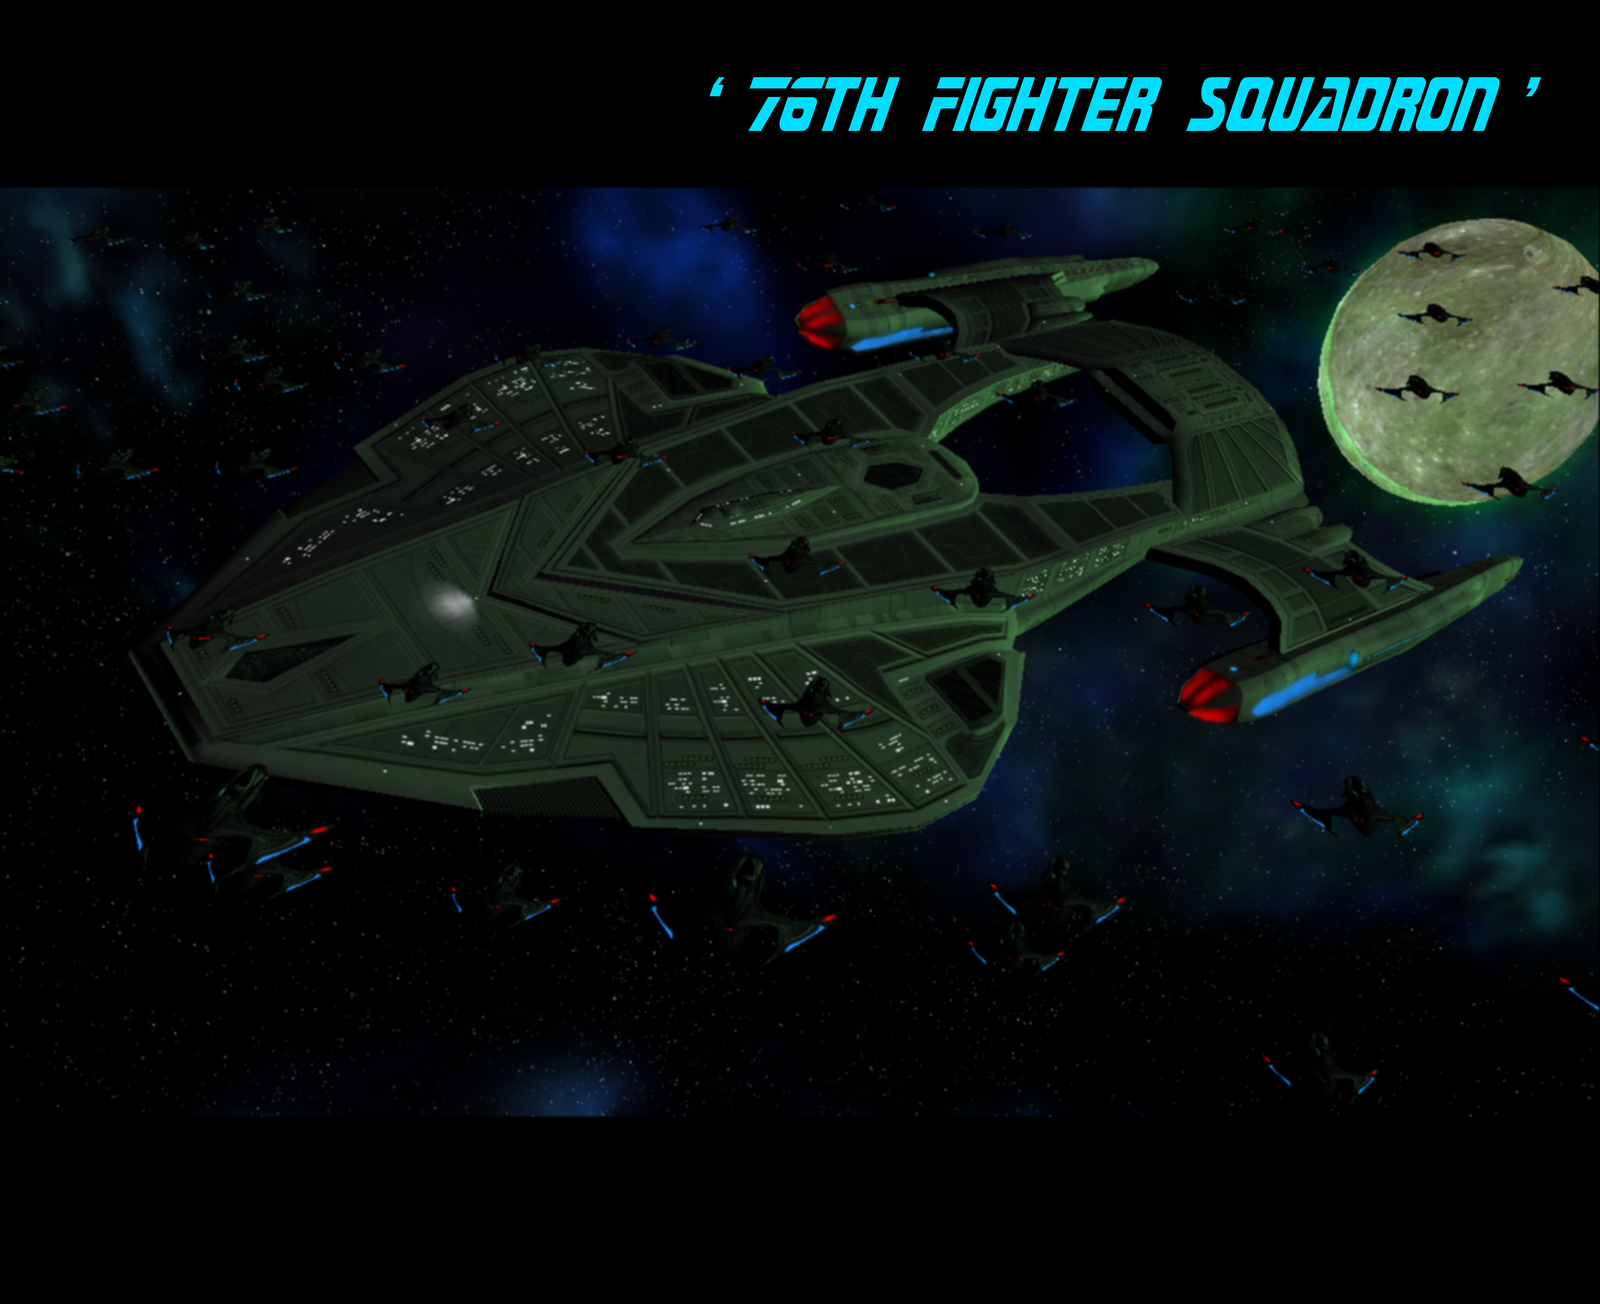 79th_fighter_squadron_by_darthassassin-d5eluv2.png